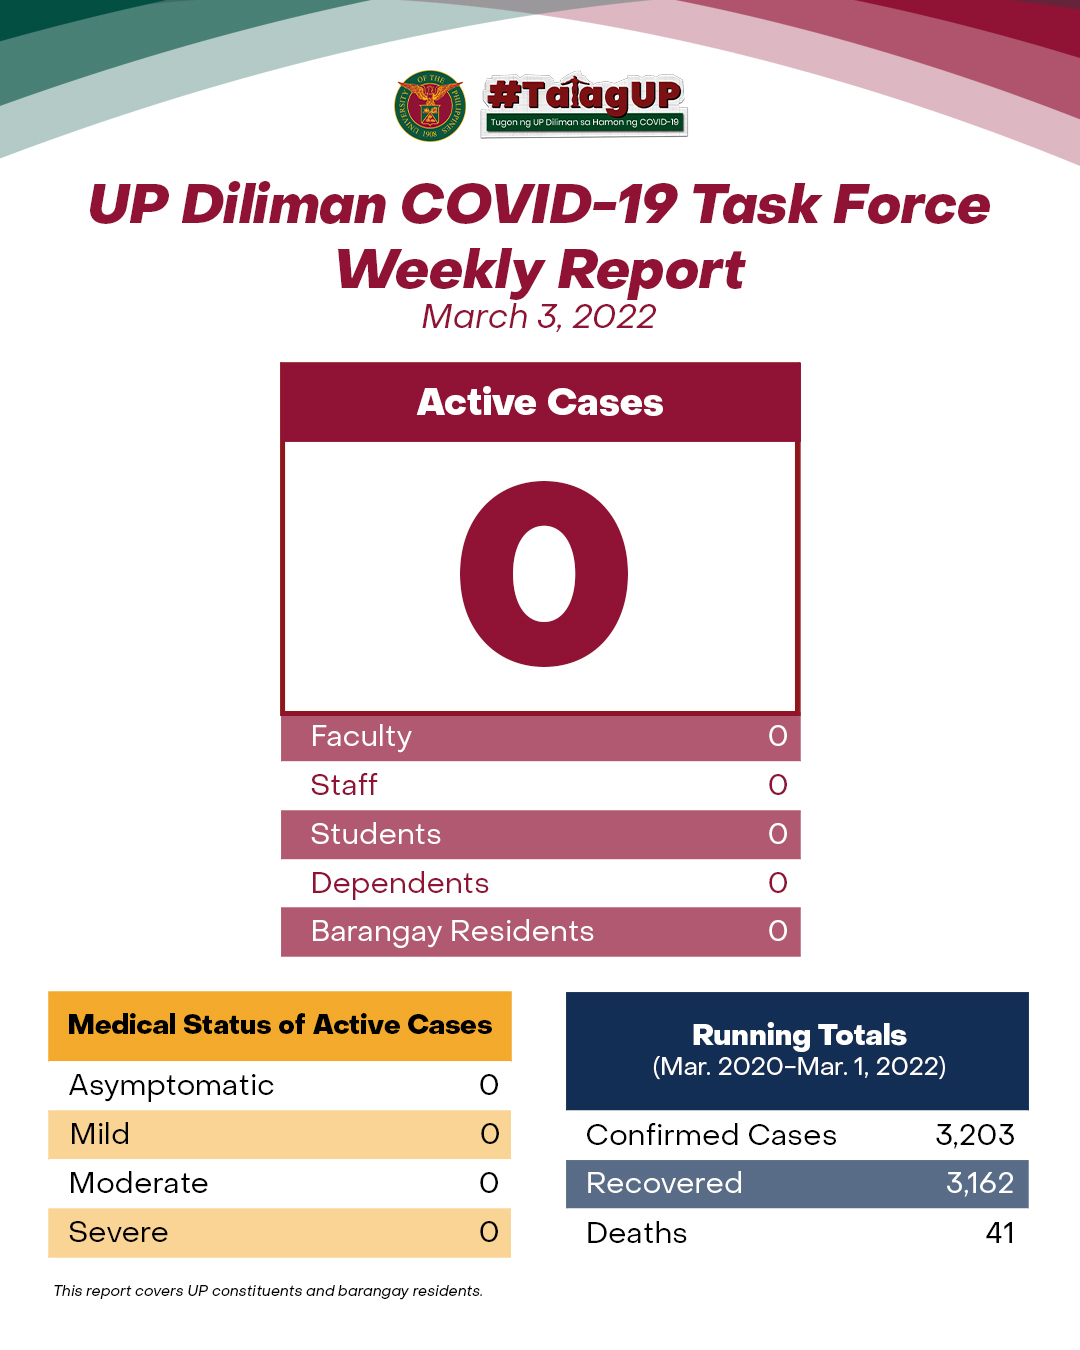 UP Diliman COVID-19 Task Force Weekly Report (March 3, 2022)